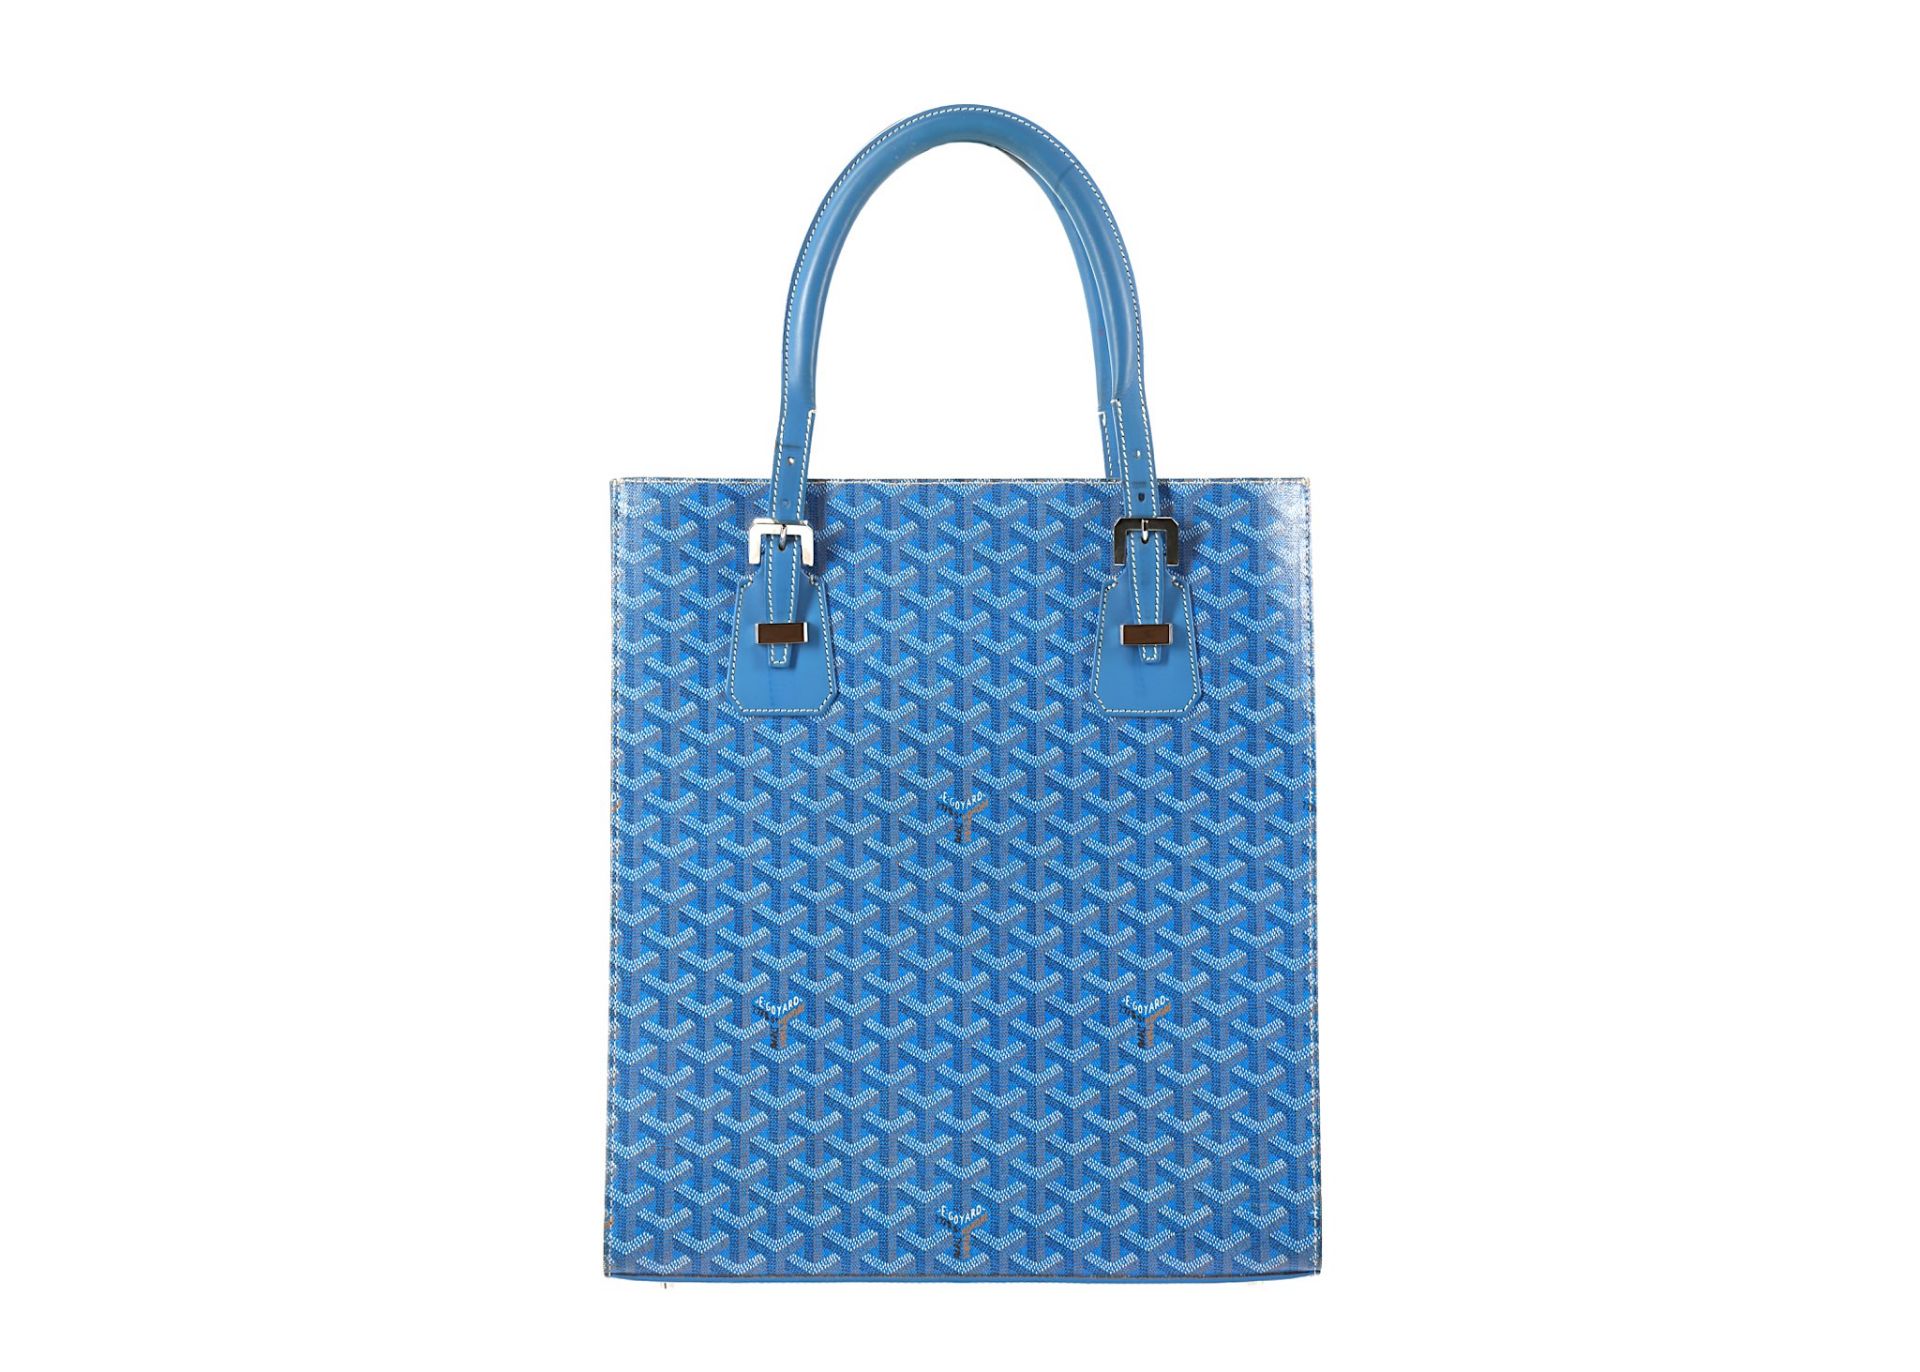 Goyard Blue Comores Tote Bag, hand painted coated